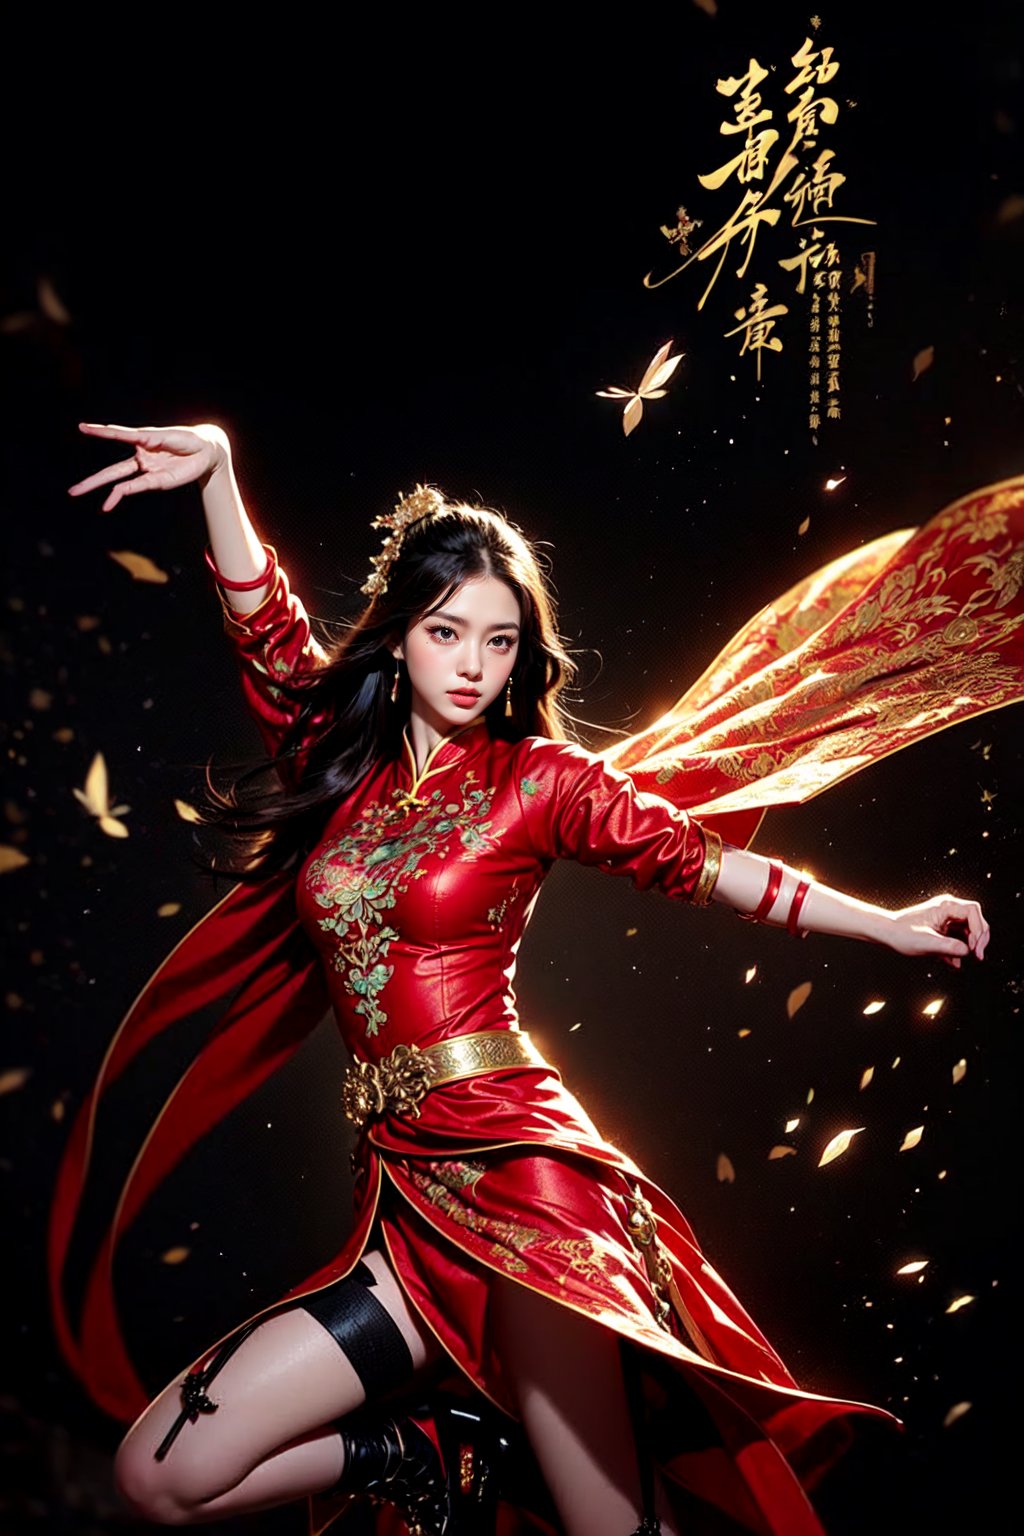 The image has a digital photography art style that resembles a promotional poster.  The composition shows a woman wearing traditional Chinese clothing, with a dynamic posture that emphasizes movement.  She wore a long red dress with delicate details and lace-up boots.  Showcase dynamic moves of Chinese martial arts.  The background features warm golden tones with flying fabric elements and calligraphy that enhance the drama.  The overall aesthetic suggests that this is a fusion of historical and fantasy themes.